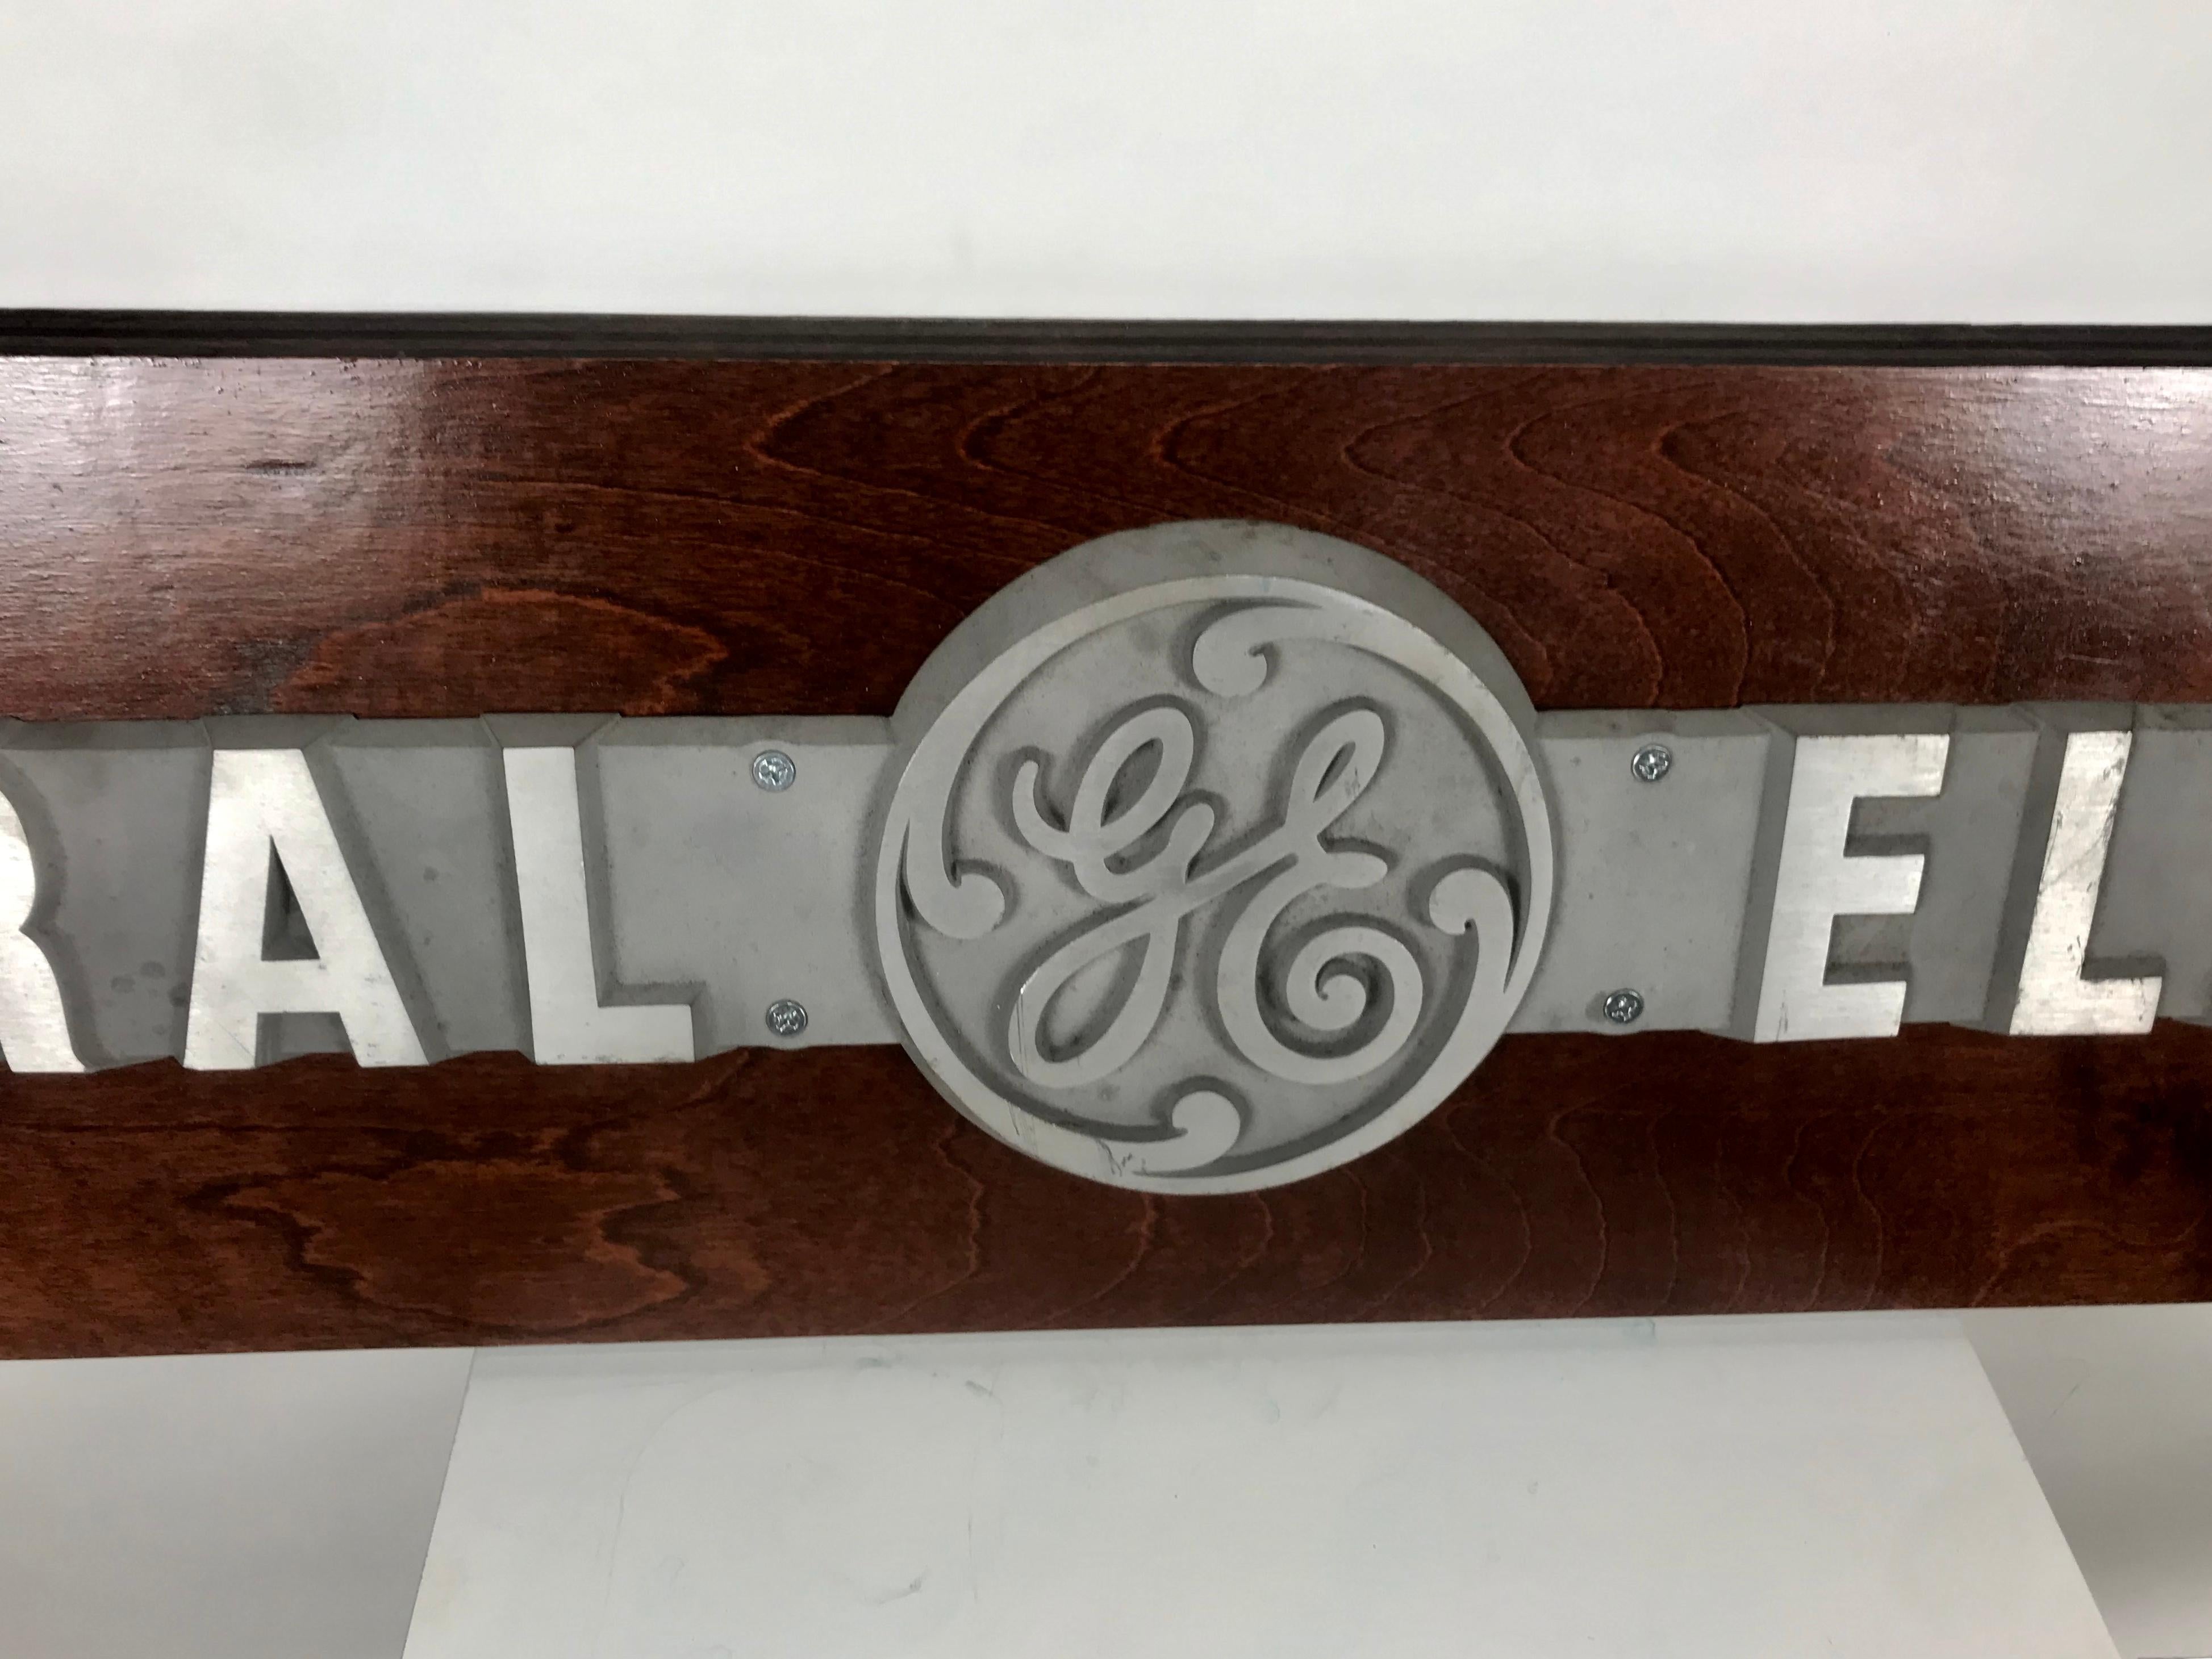 1950s aluminum on wood General Electric logo, sign plaque. Salvaged from General Electric Buffalo NY office, stunning, original plaque, cast aluminum depicting famous G E Logo, mounted on wood.